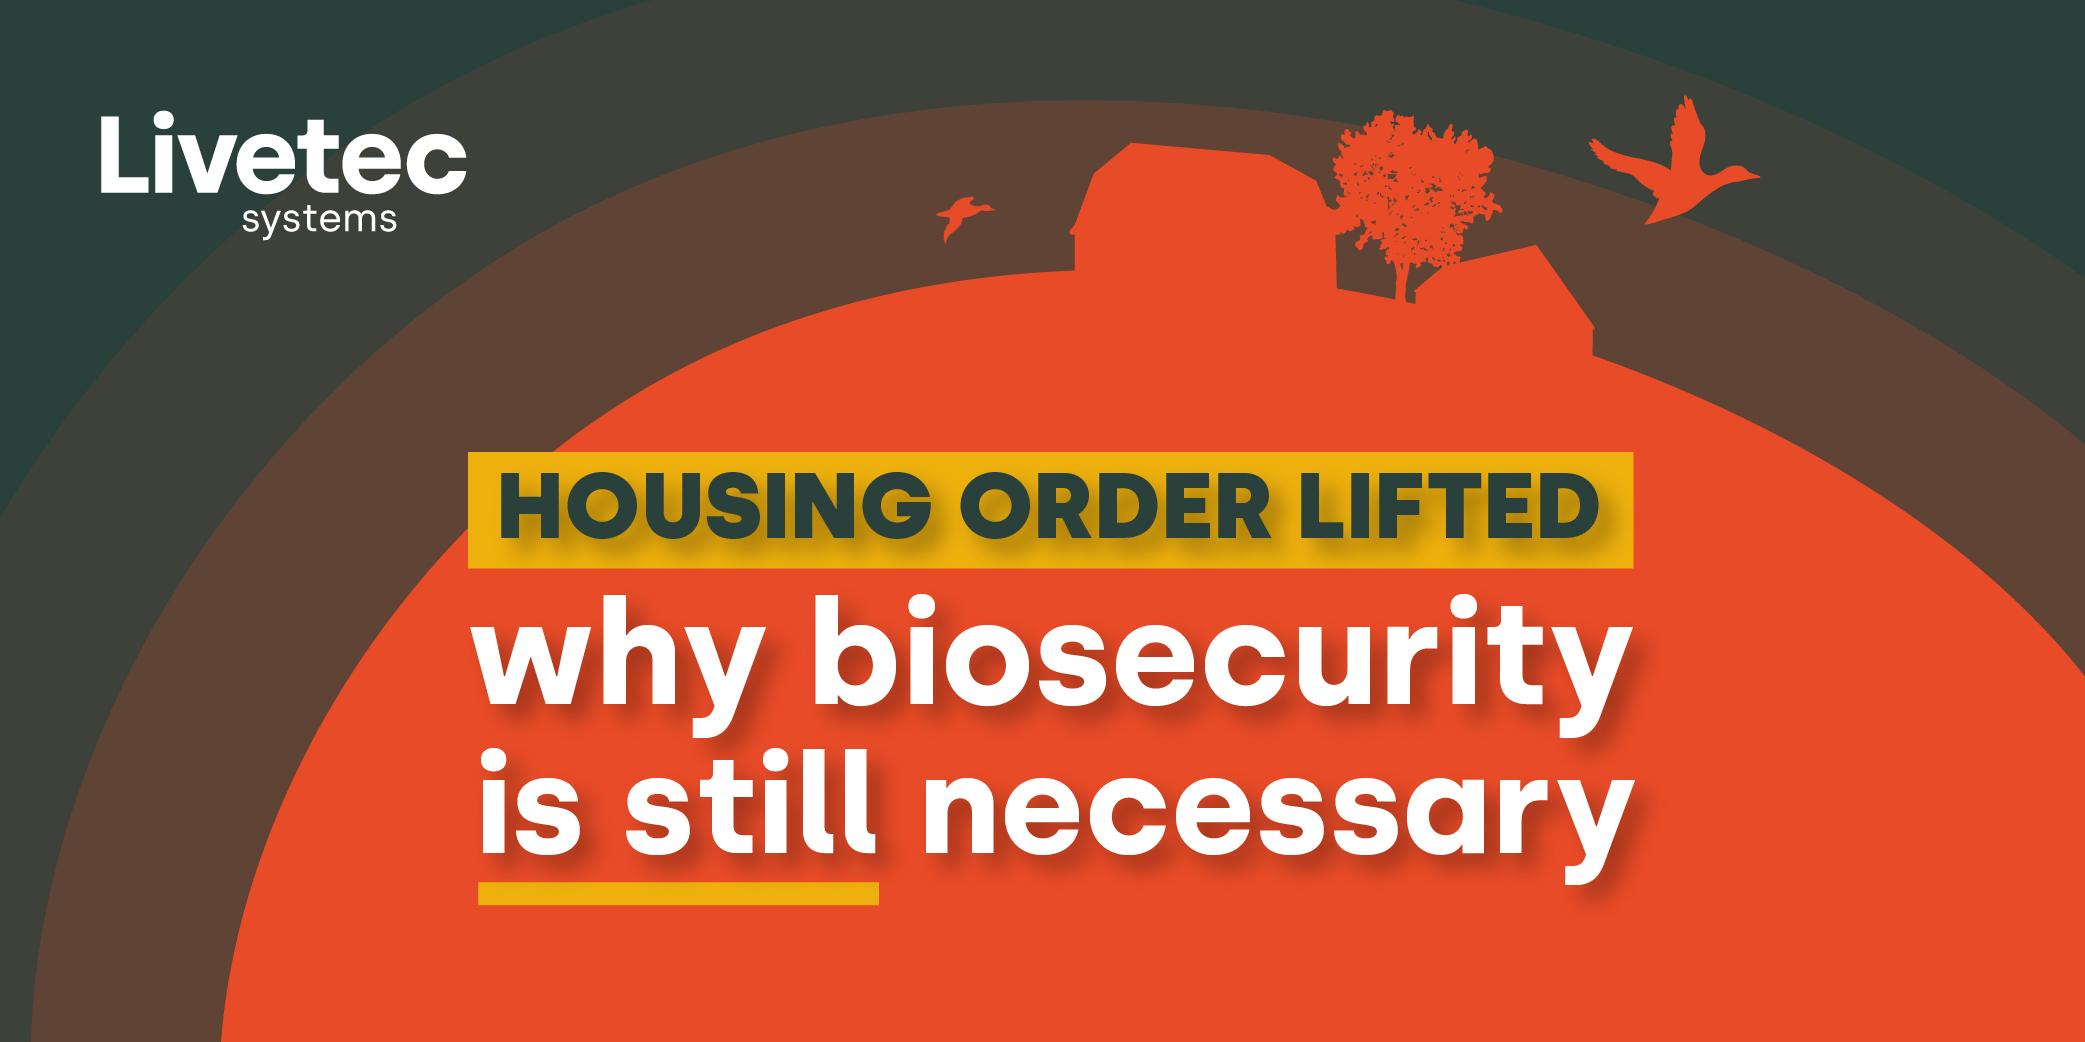 Housing order lifted: why biosecurity is still necessary